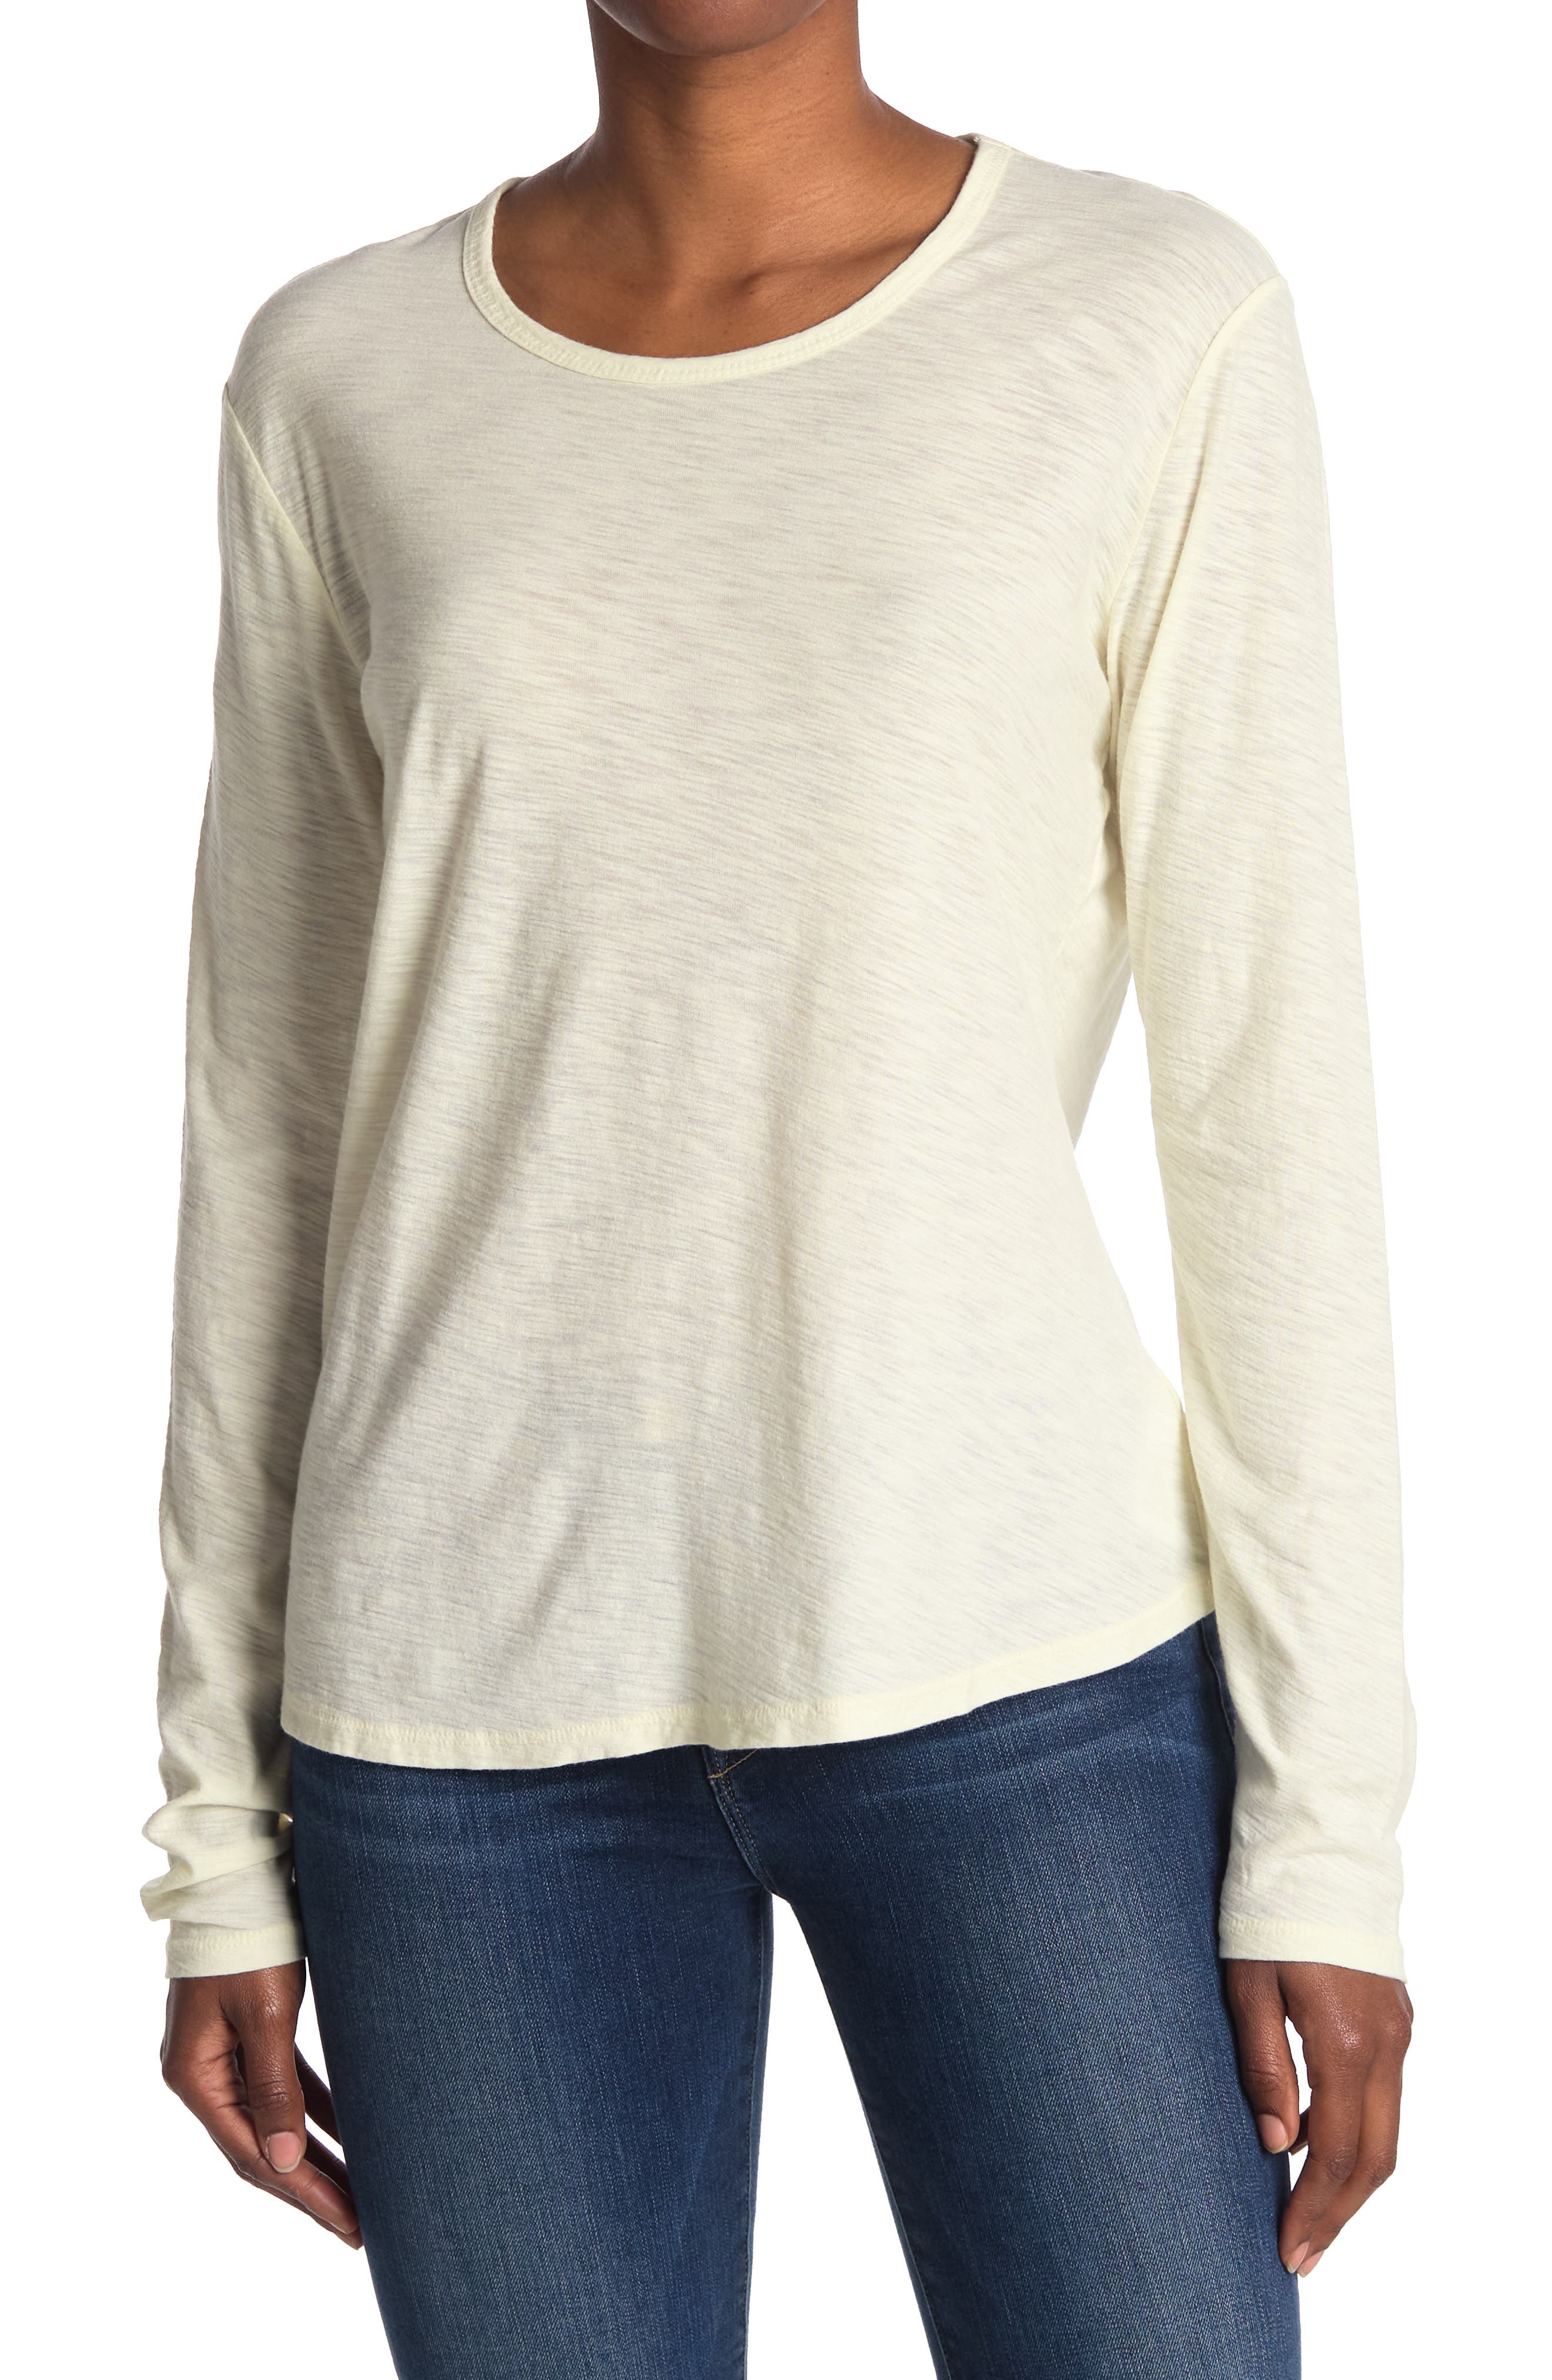 James Perse Long Sleeve Crew Neck T-shirt In Light/pastel Yellow